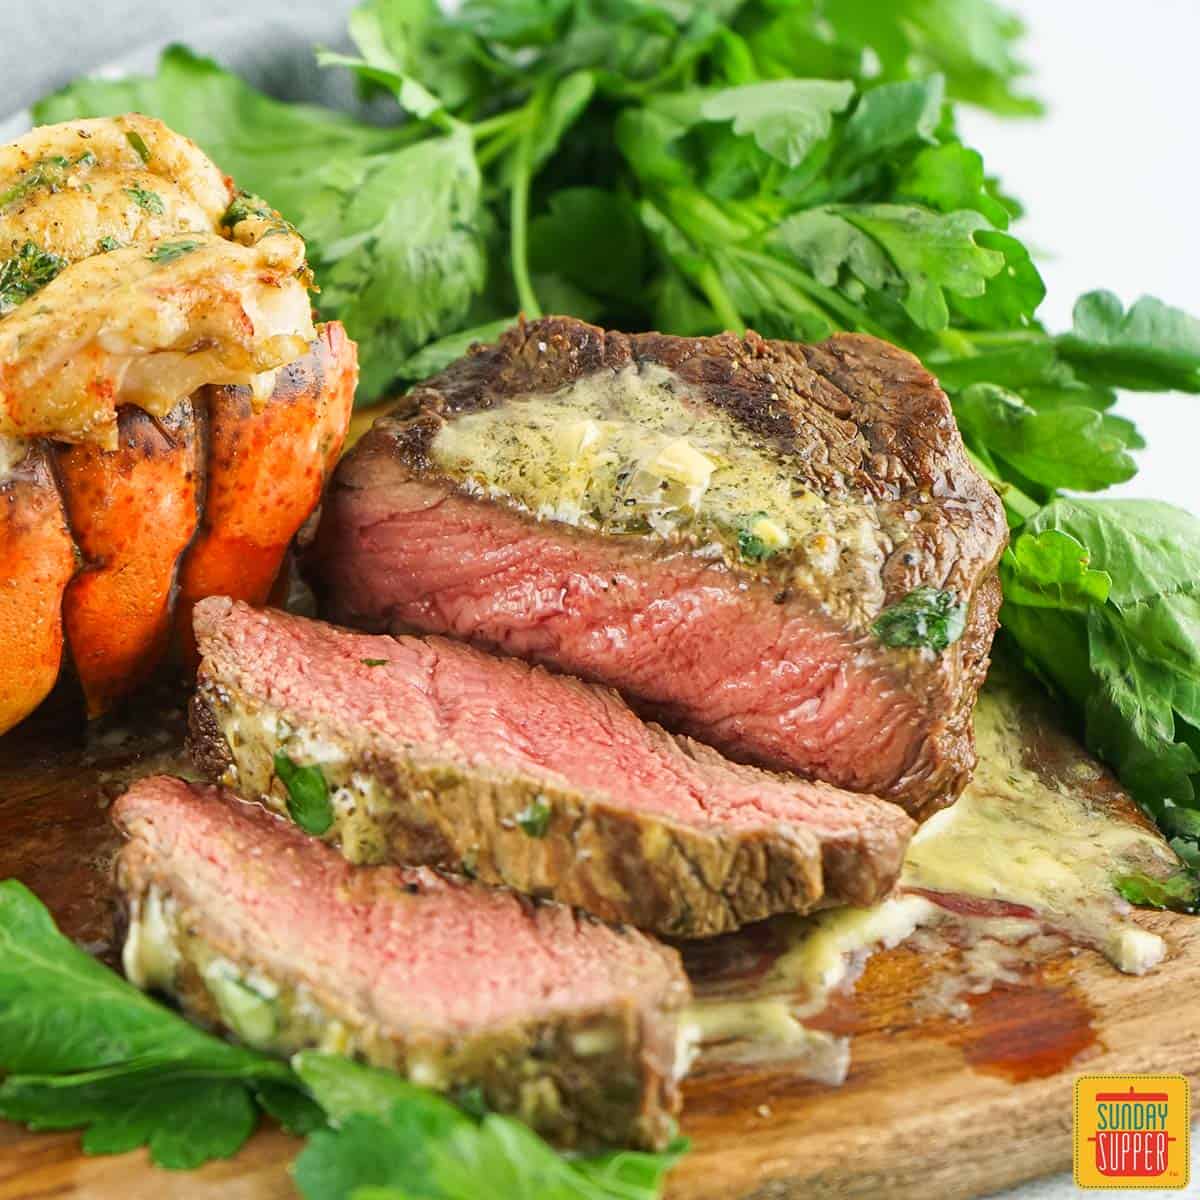 a sliced grilled filet mignon with bearnaise sauce and herbs